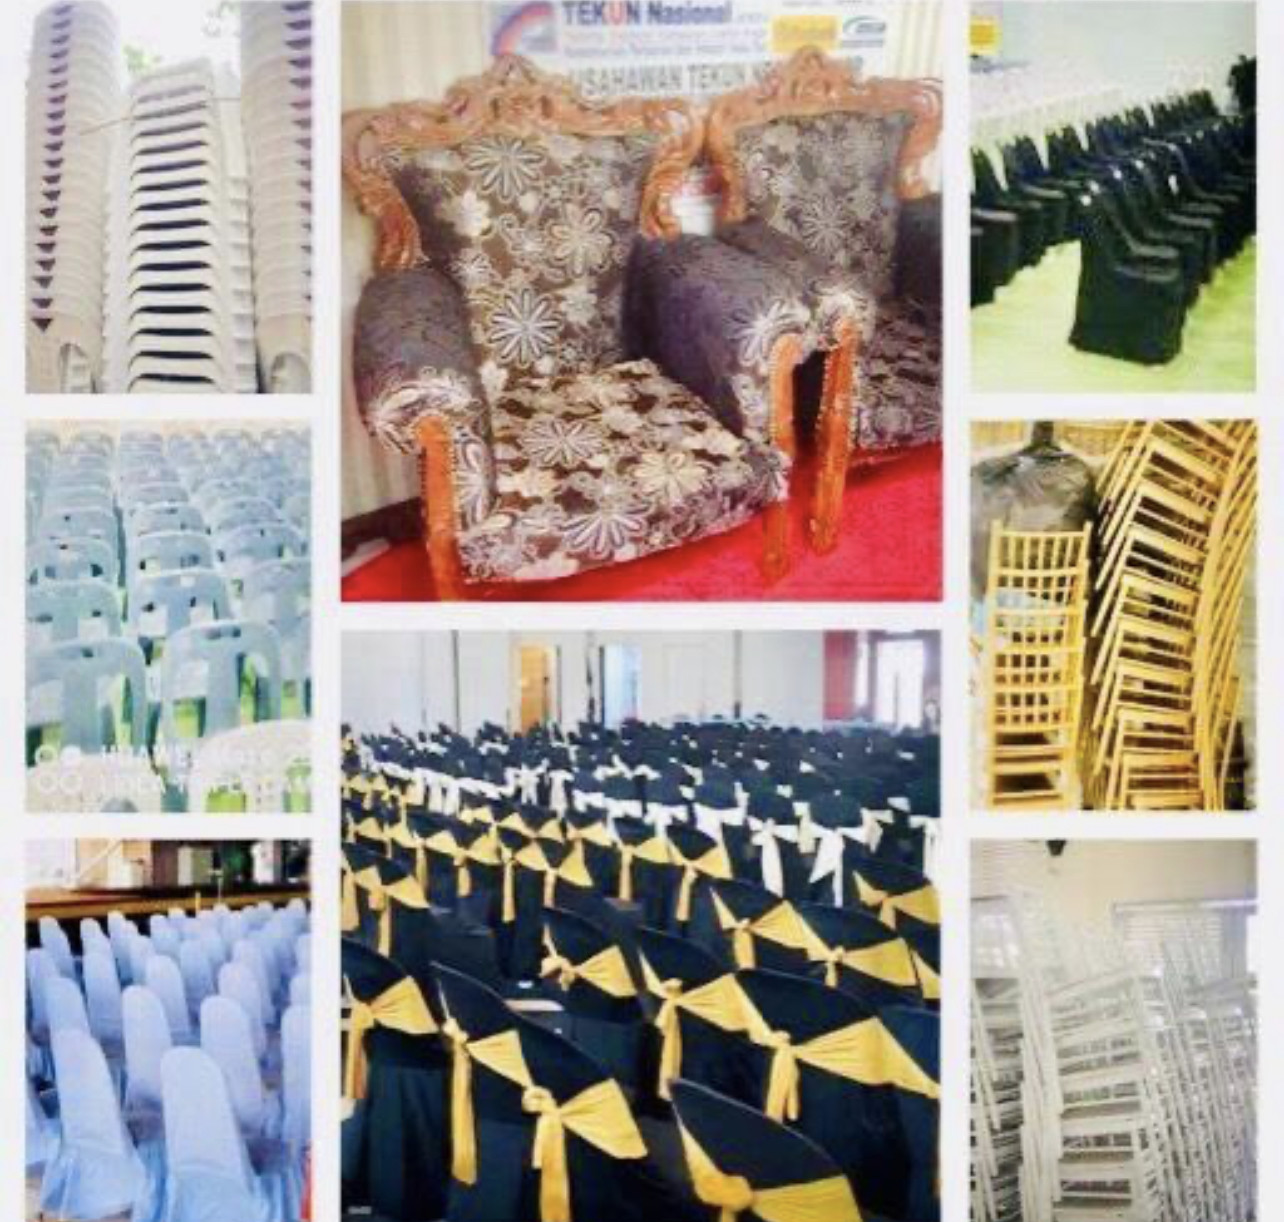 HJTC Event Management & Catering